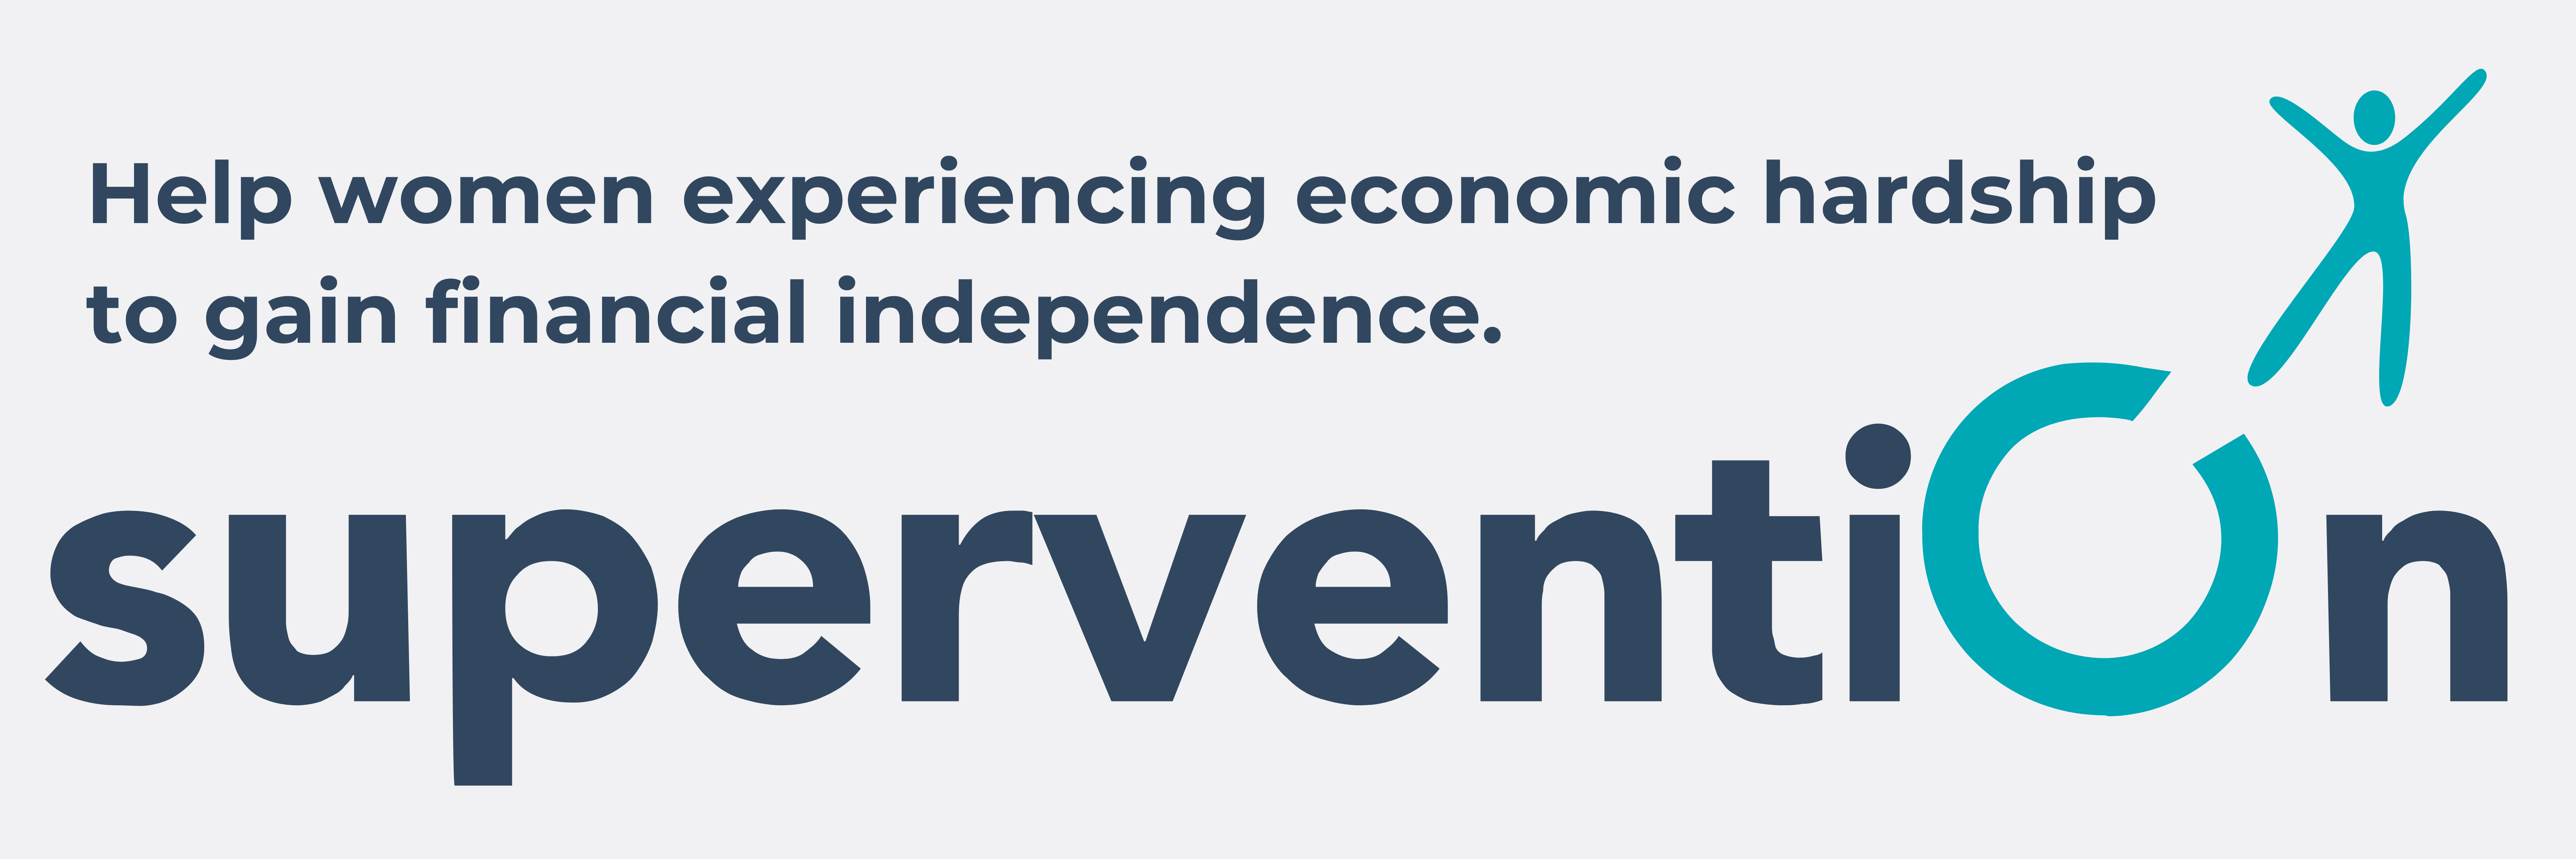 Supervention. Help women experiencing economic hardship gain financial independence.